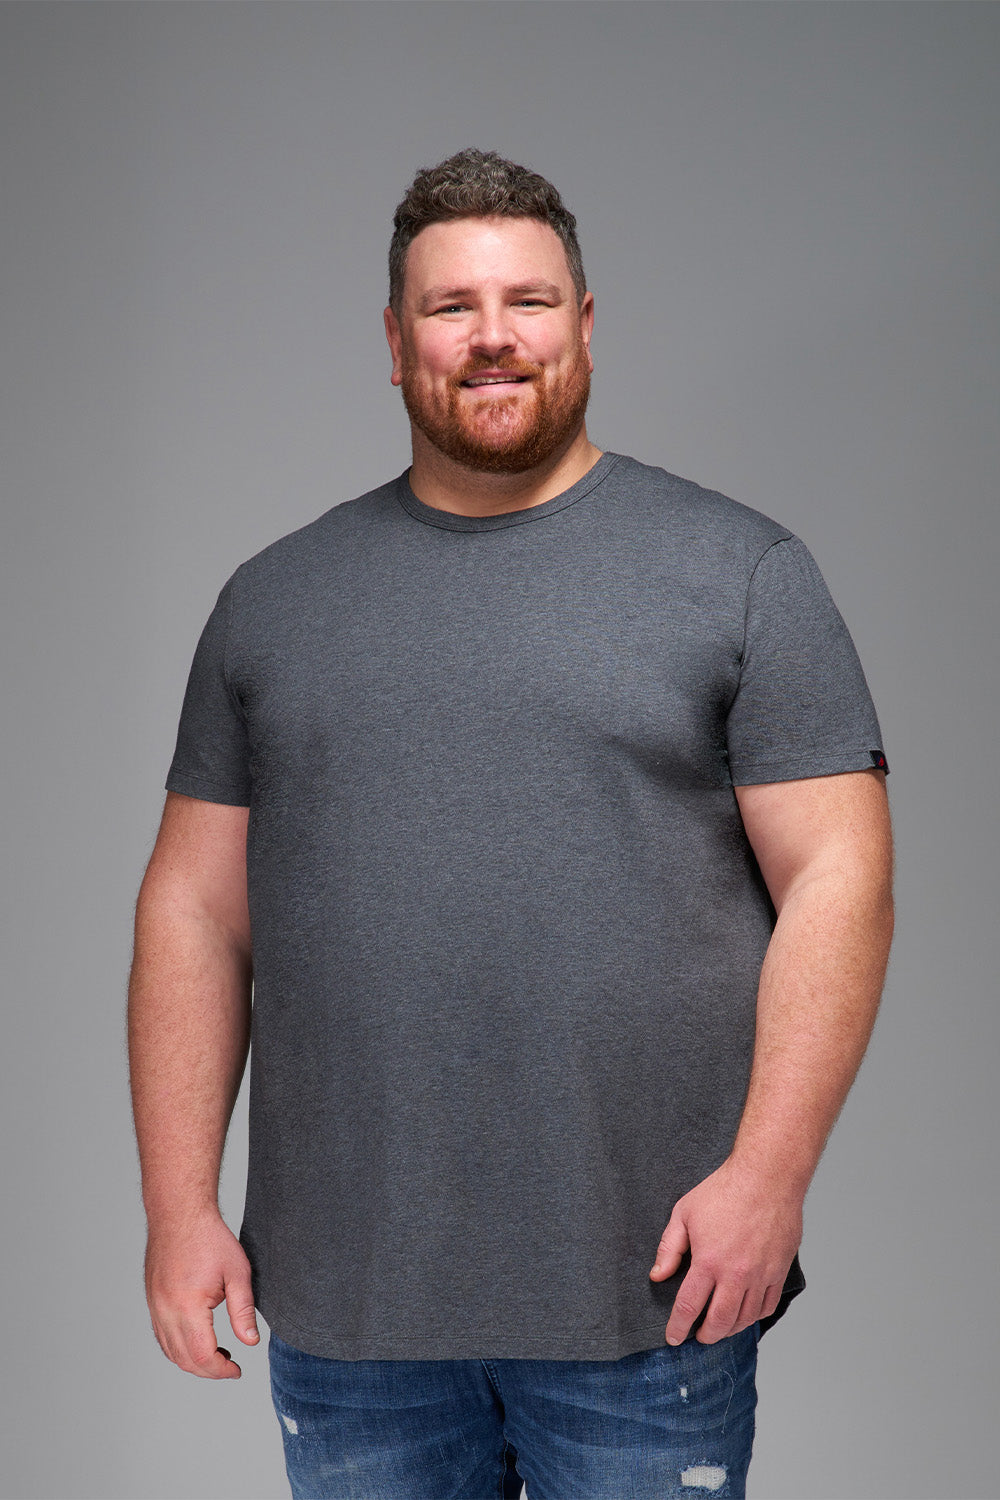 STRONGSIZE Men's Big and Tall Shirts – Stretch T-Shirt for Casual Wear  Longer Length Navy Blue 7XL